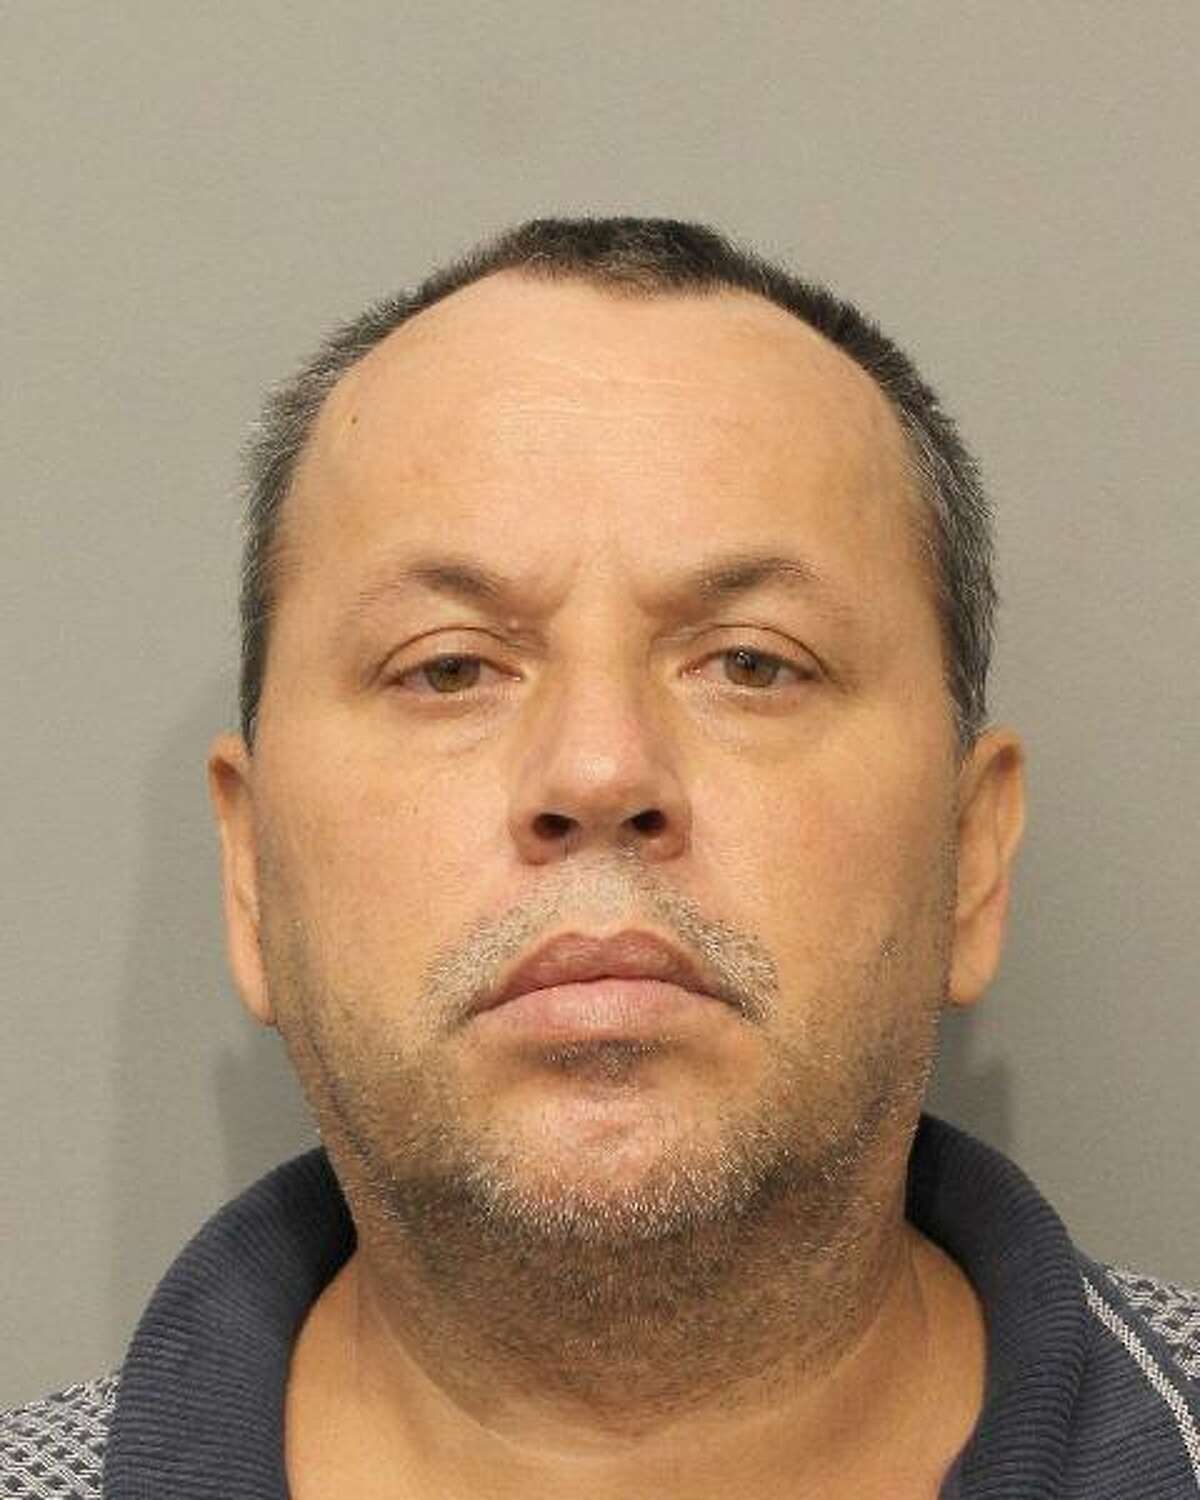 Jose Lopez has been arrested in a 2003 fatal shooting at a Houston End End bar.